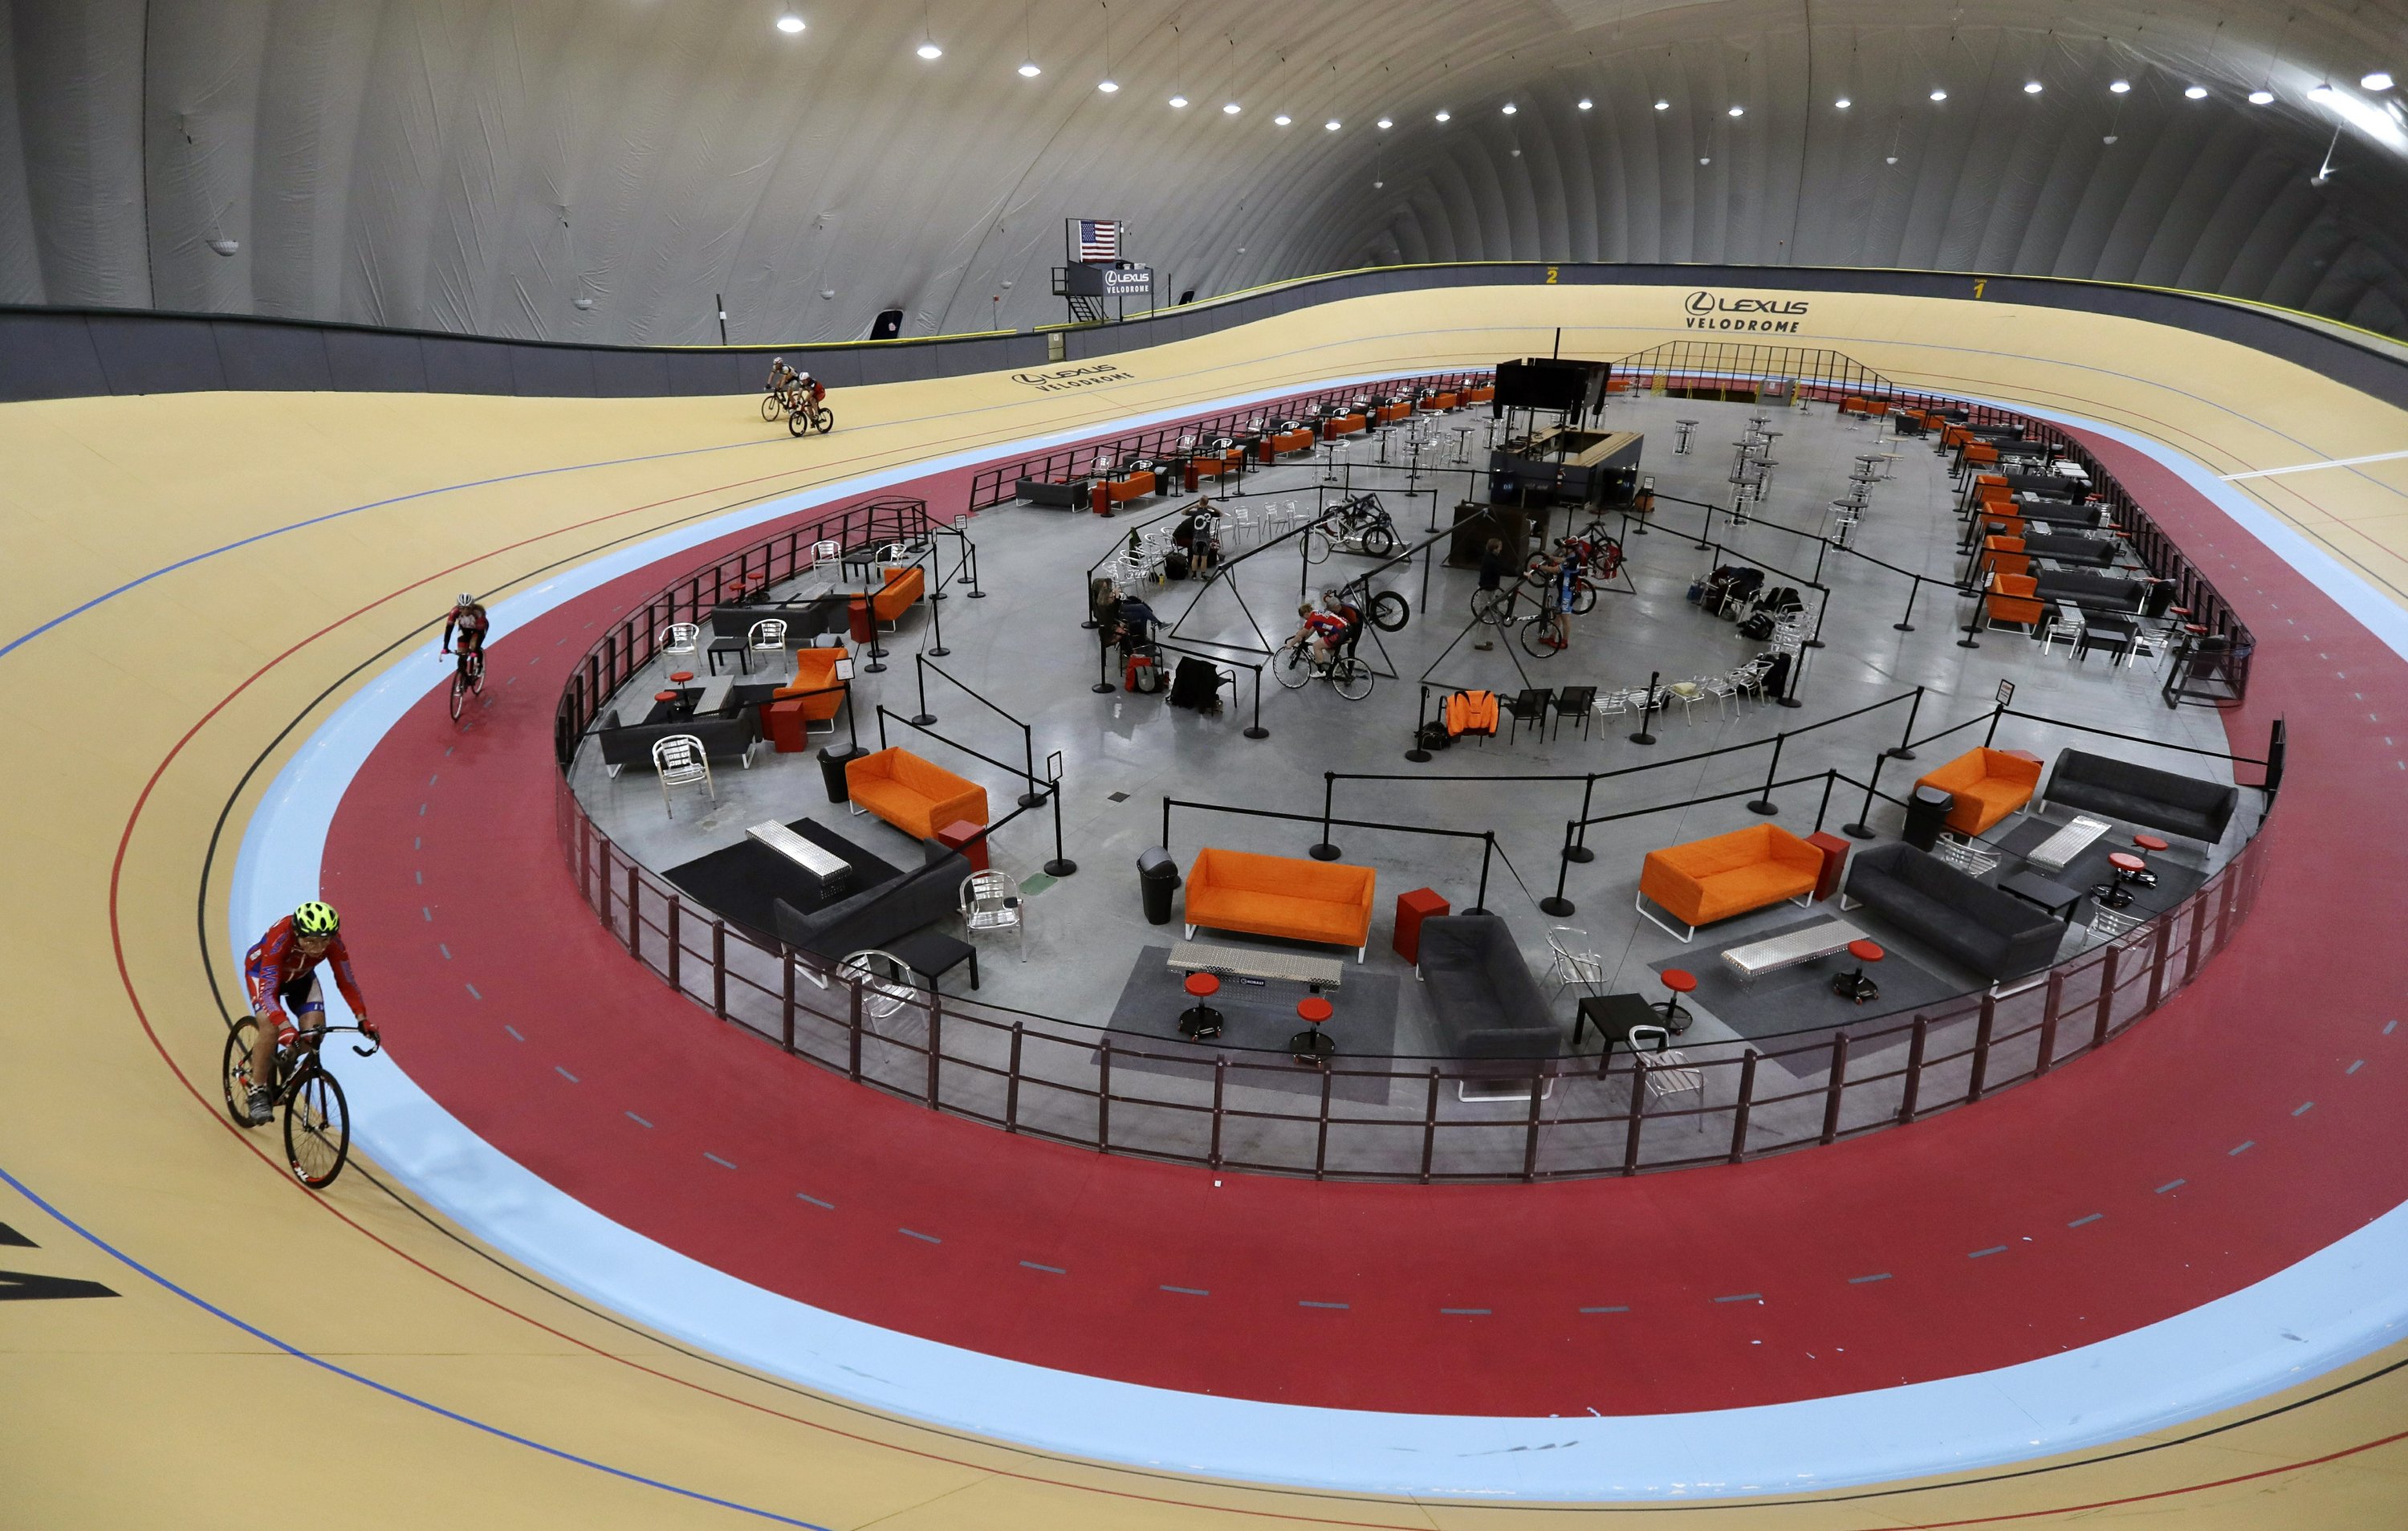 indoor cycling track